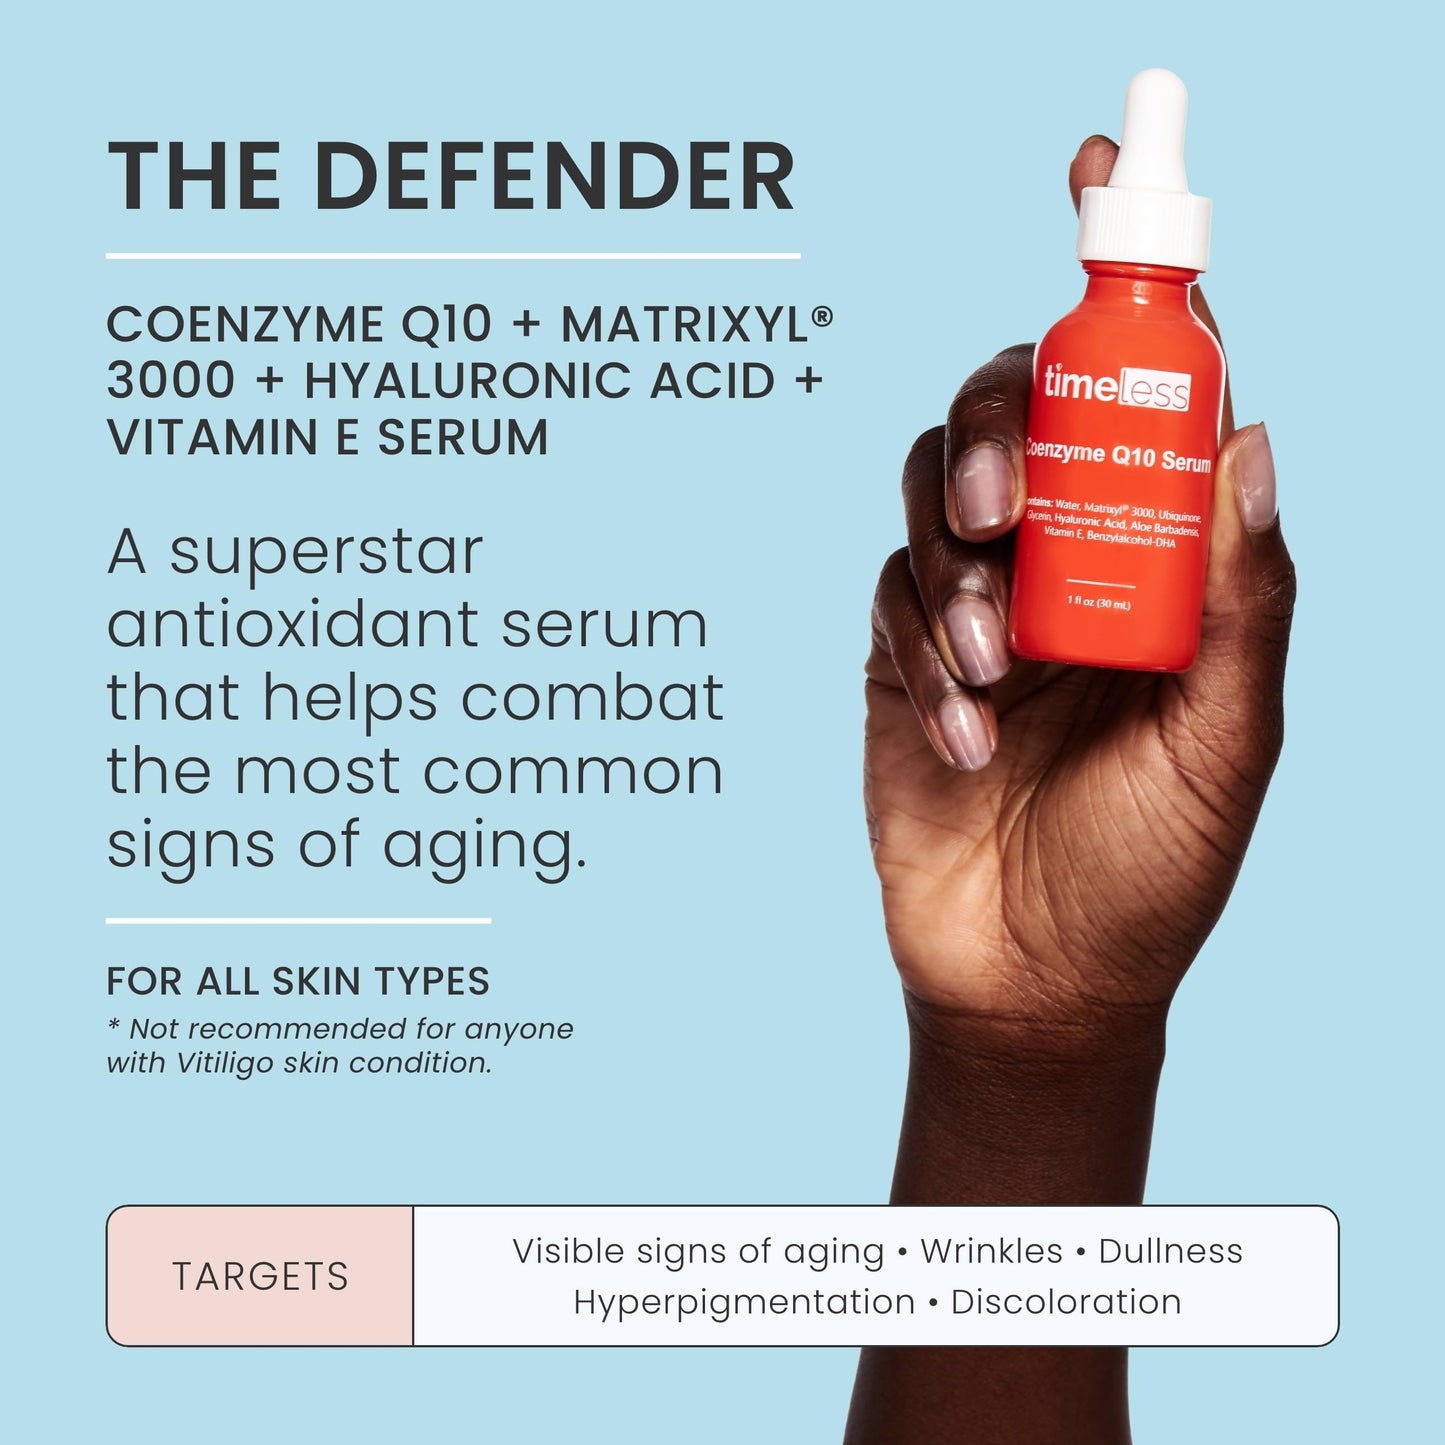 Timeless Skin Care Coenzyme Q10 Serum - Skin Care Serum for Smoothing Skin - Fragrance-Free Coenzyme Q10 Serum with Hyaluronic Acid - Antioxidant Serum for Skin Care - 4 Fl Oz